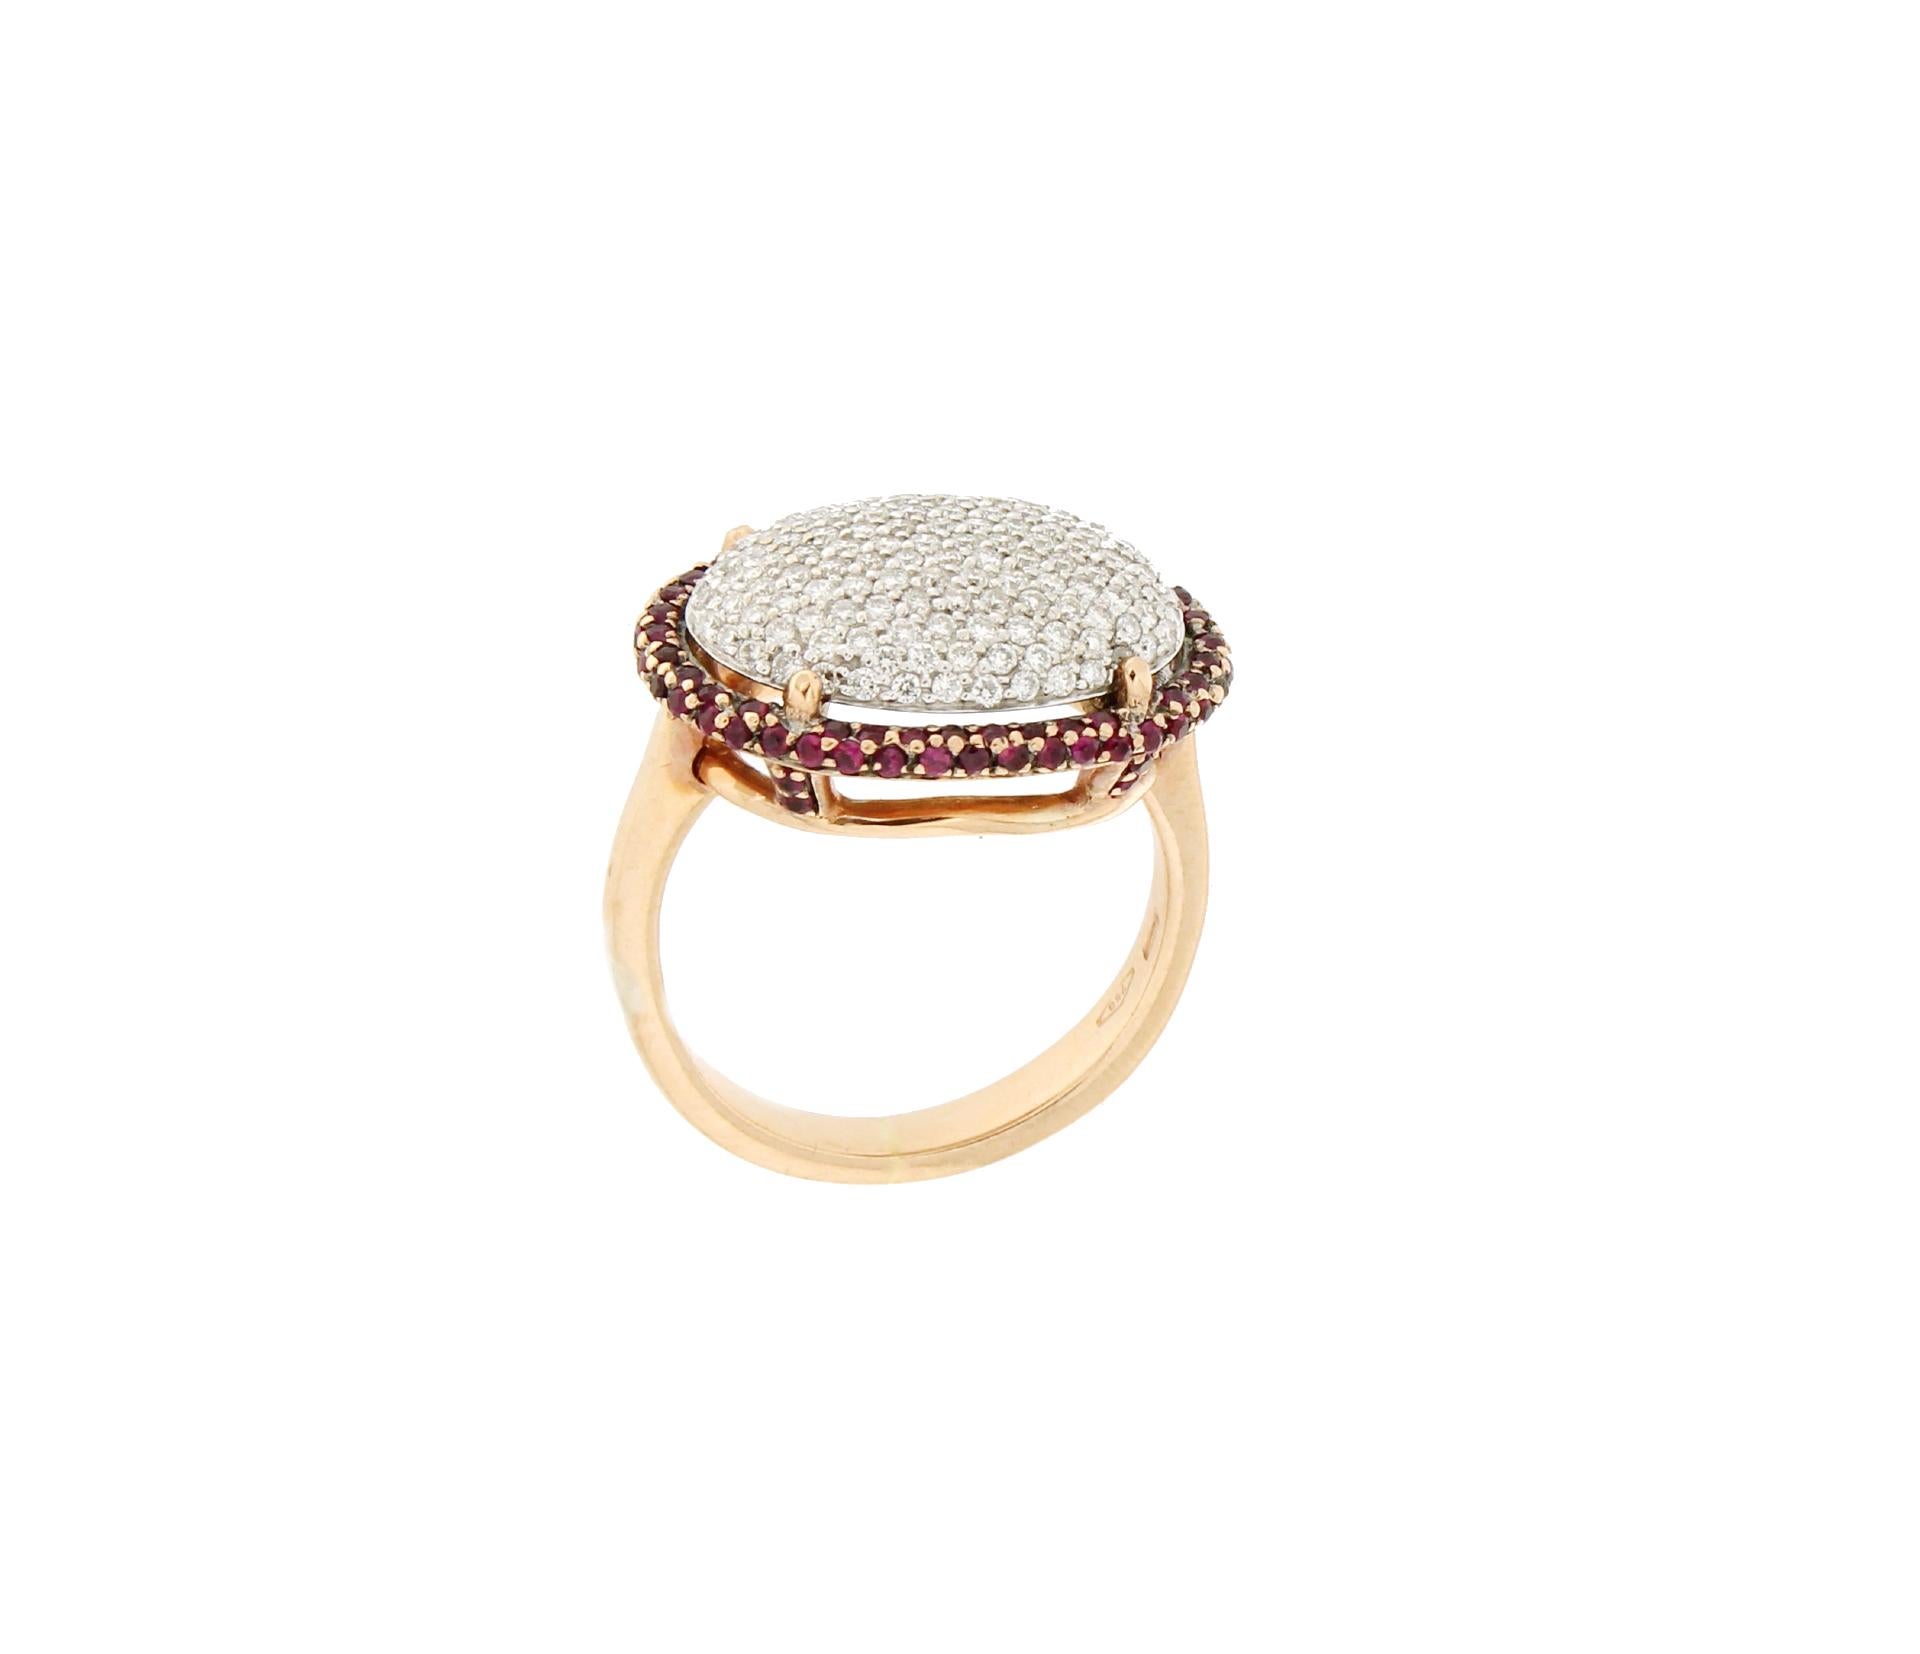 Women's Handcraft Rubies 18 Karat White and Yellow Gold Diamonds Cocktail Ring For Sale